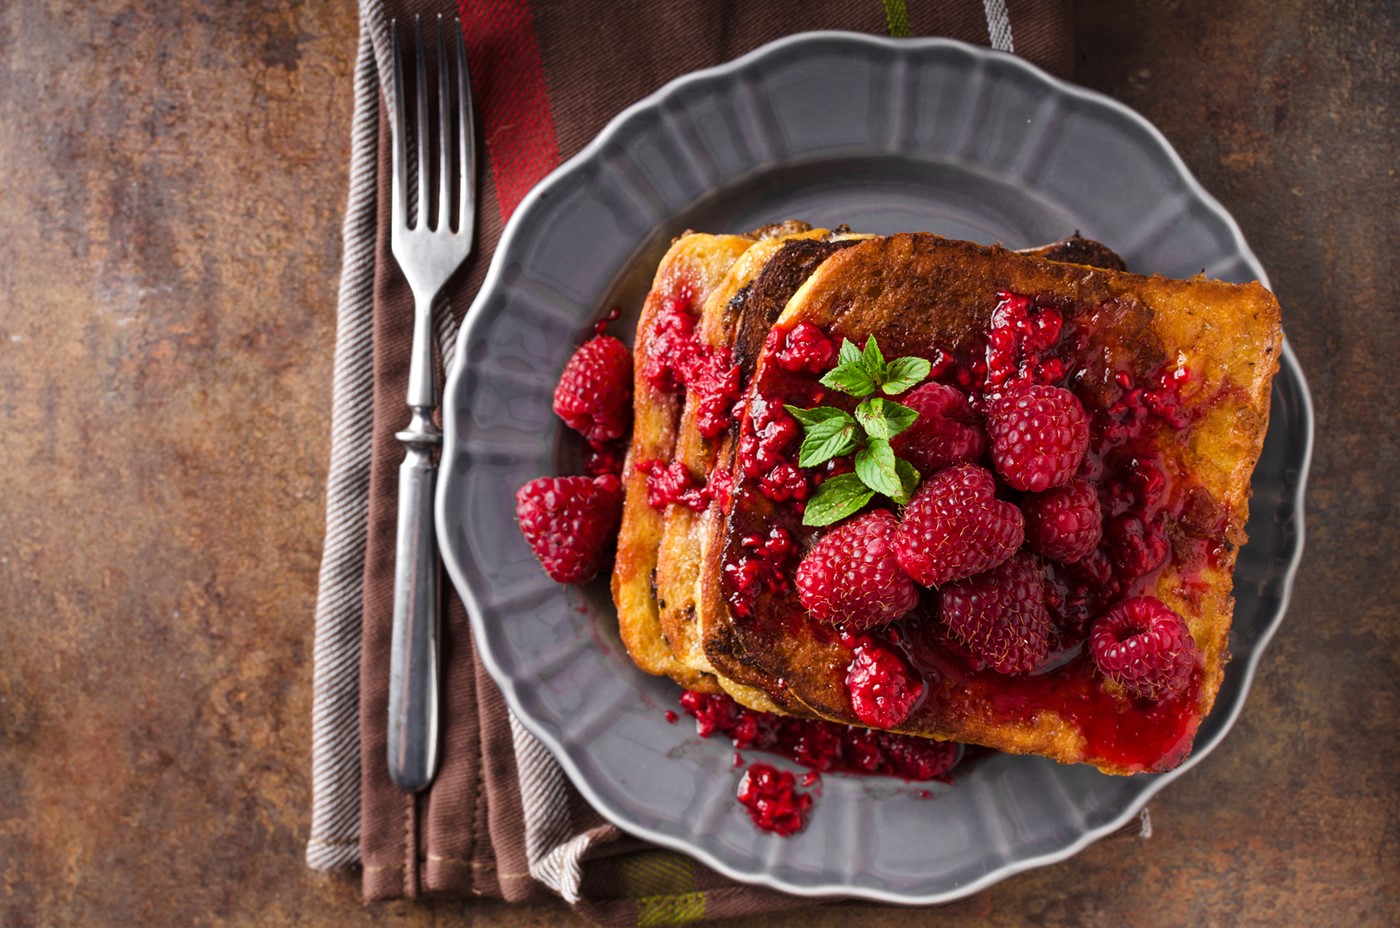 Summer Berry French Toast Recipe with a Warm Vanilla Infusion - simply dairy-free, nut-free, soy-free and optionally gluten free